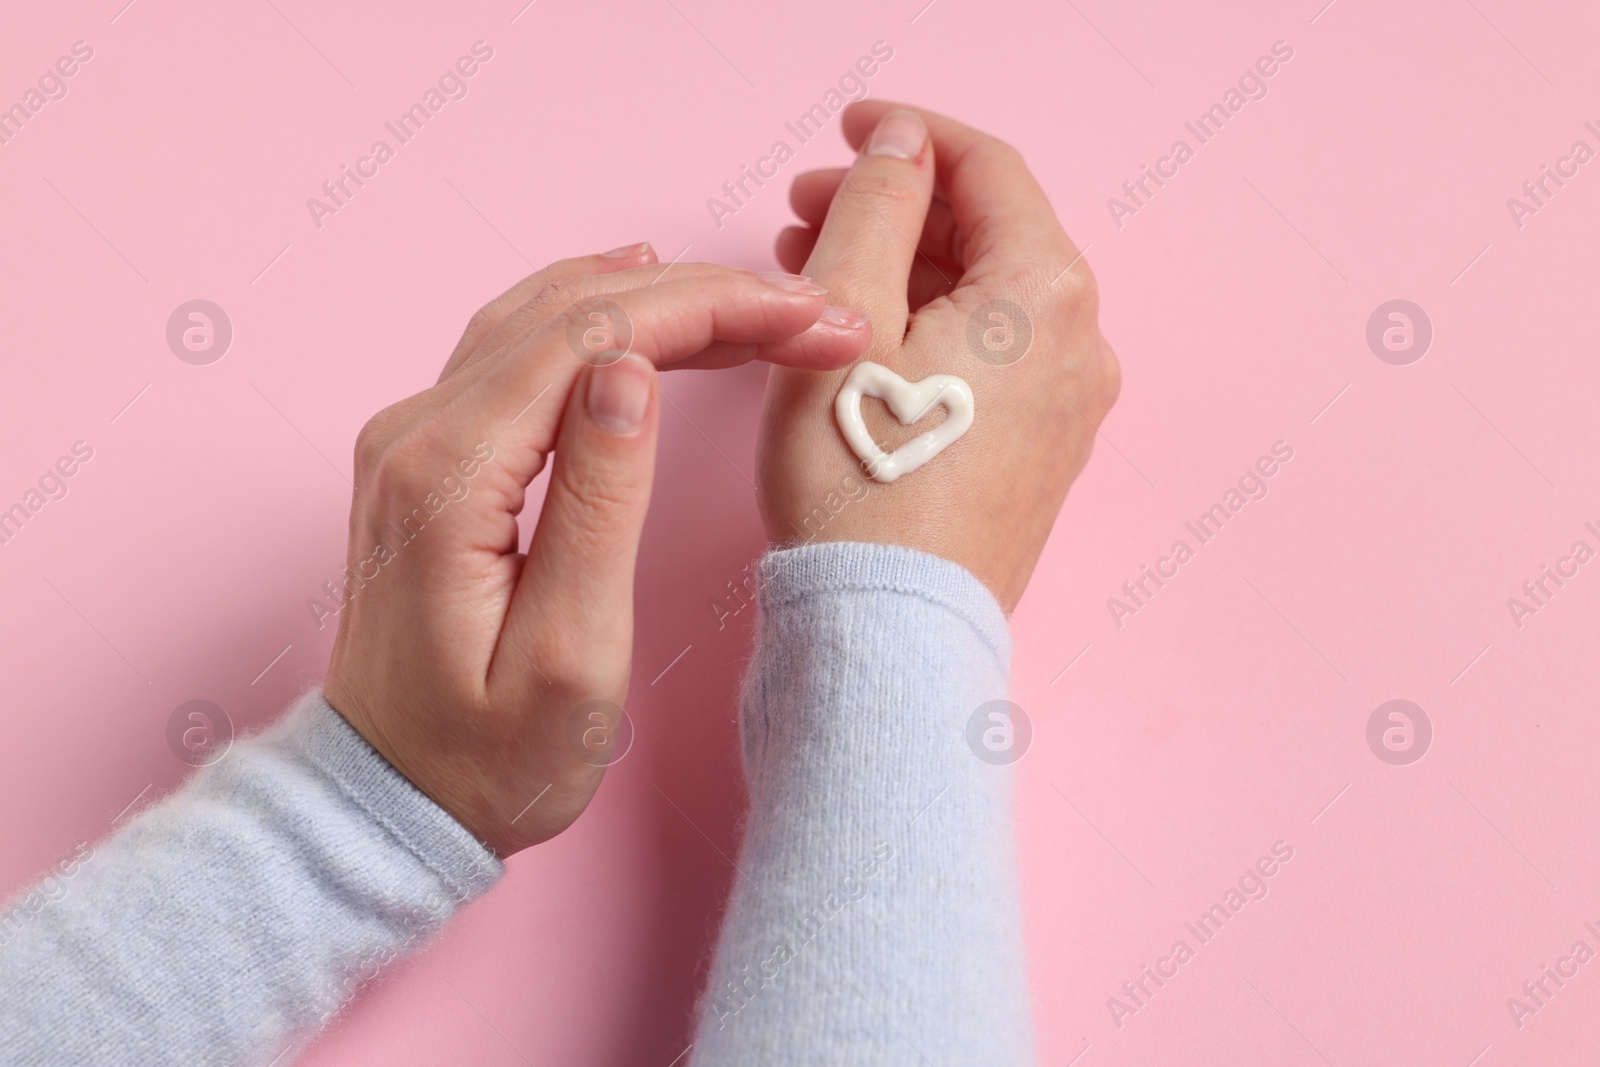 Photo of Woman with heart made of cosmetic cream on hand against pink background, closeup